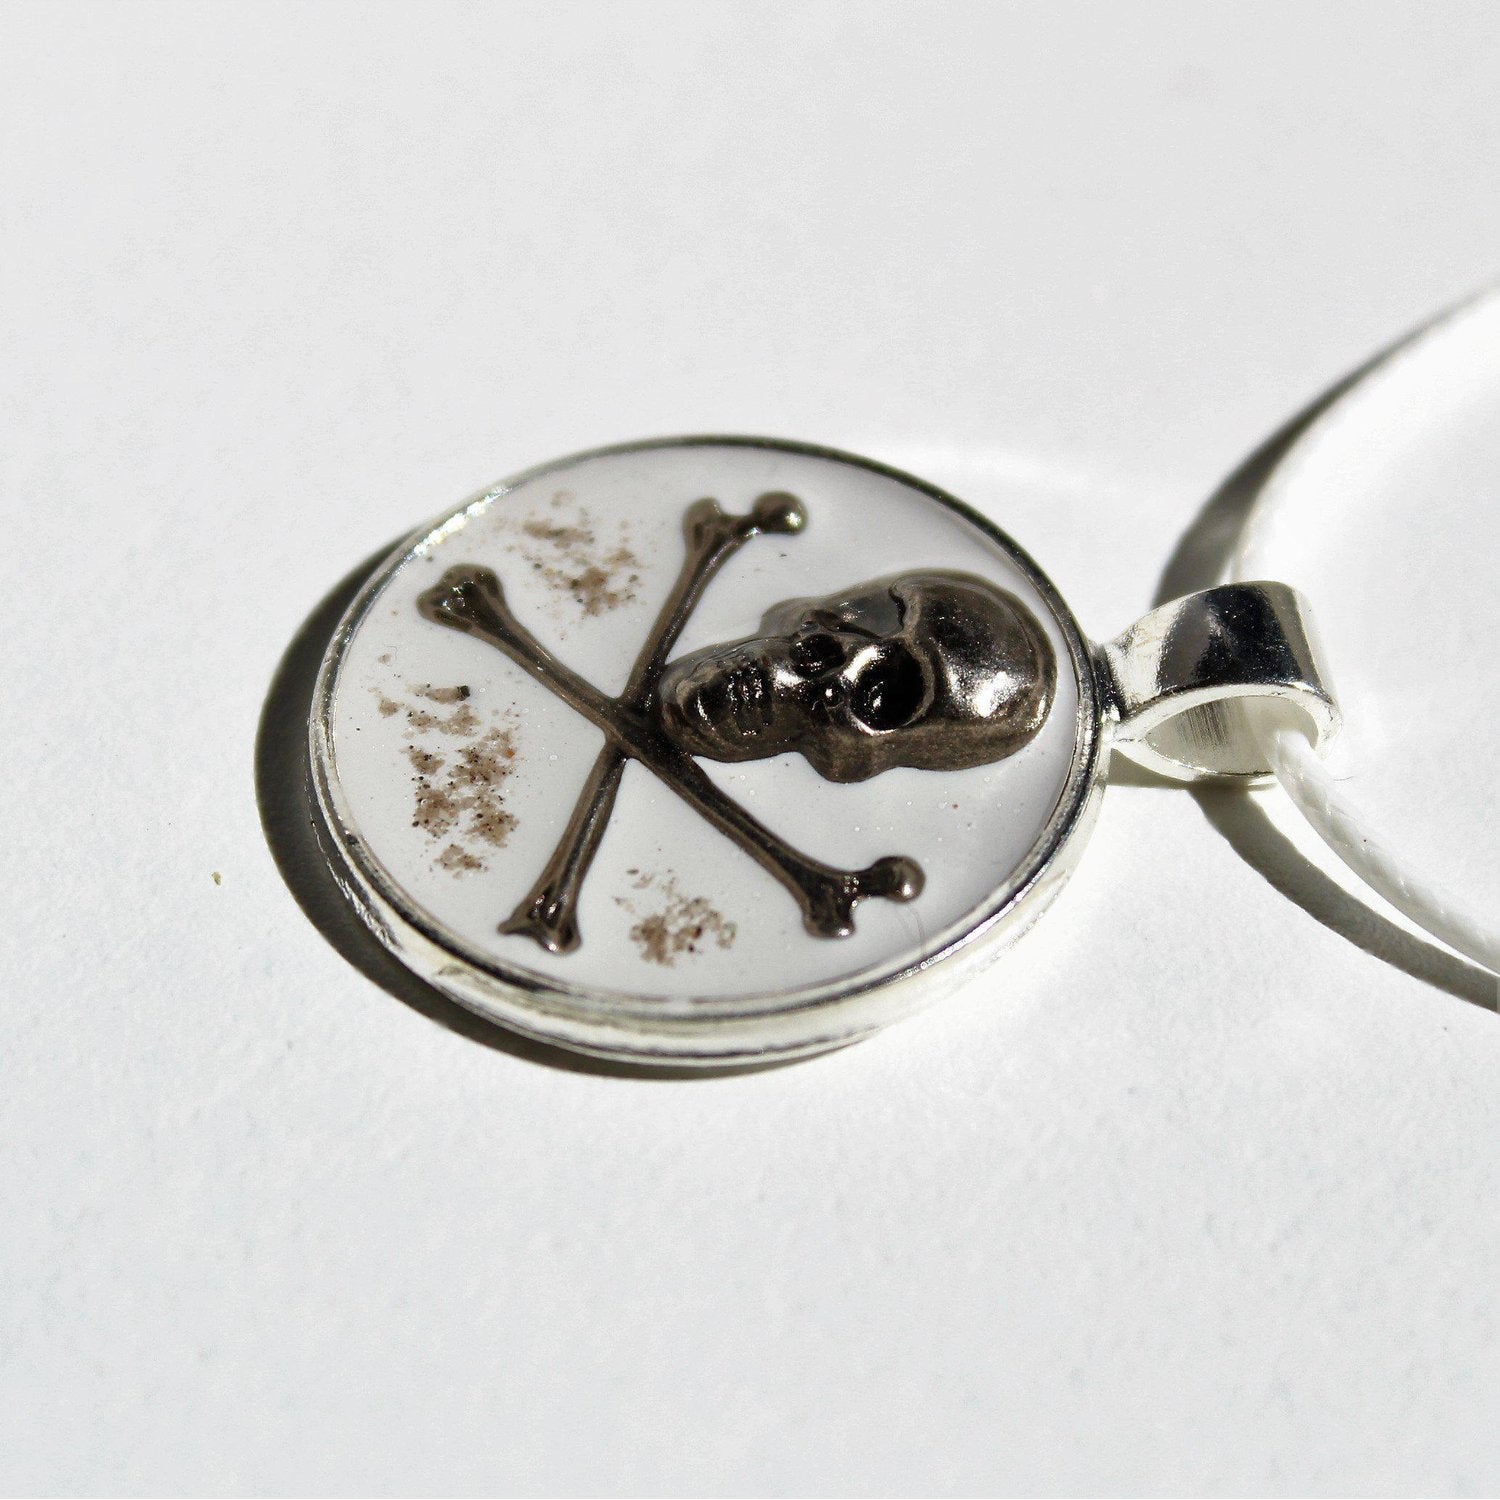 The Skull and Crossbones Cremation Pendant